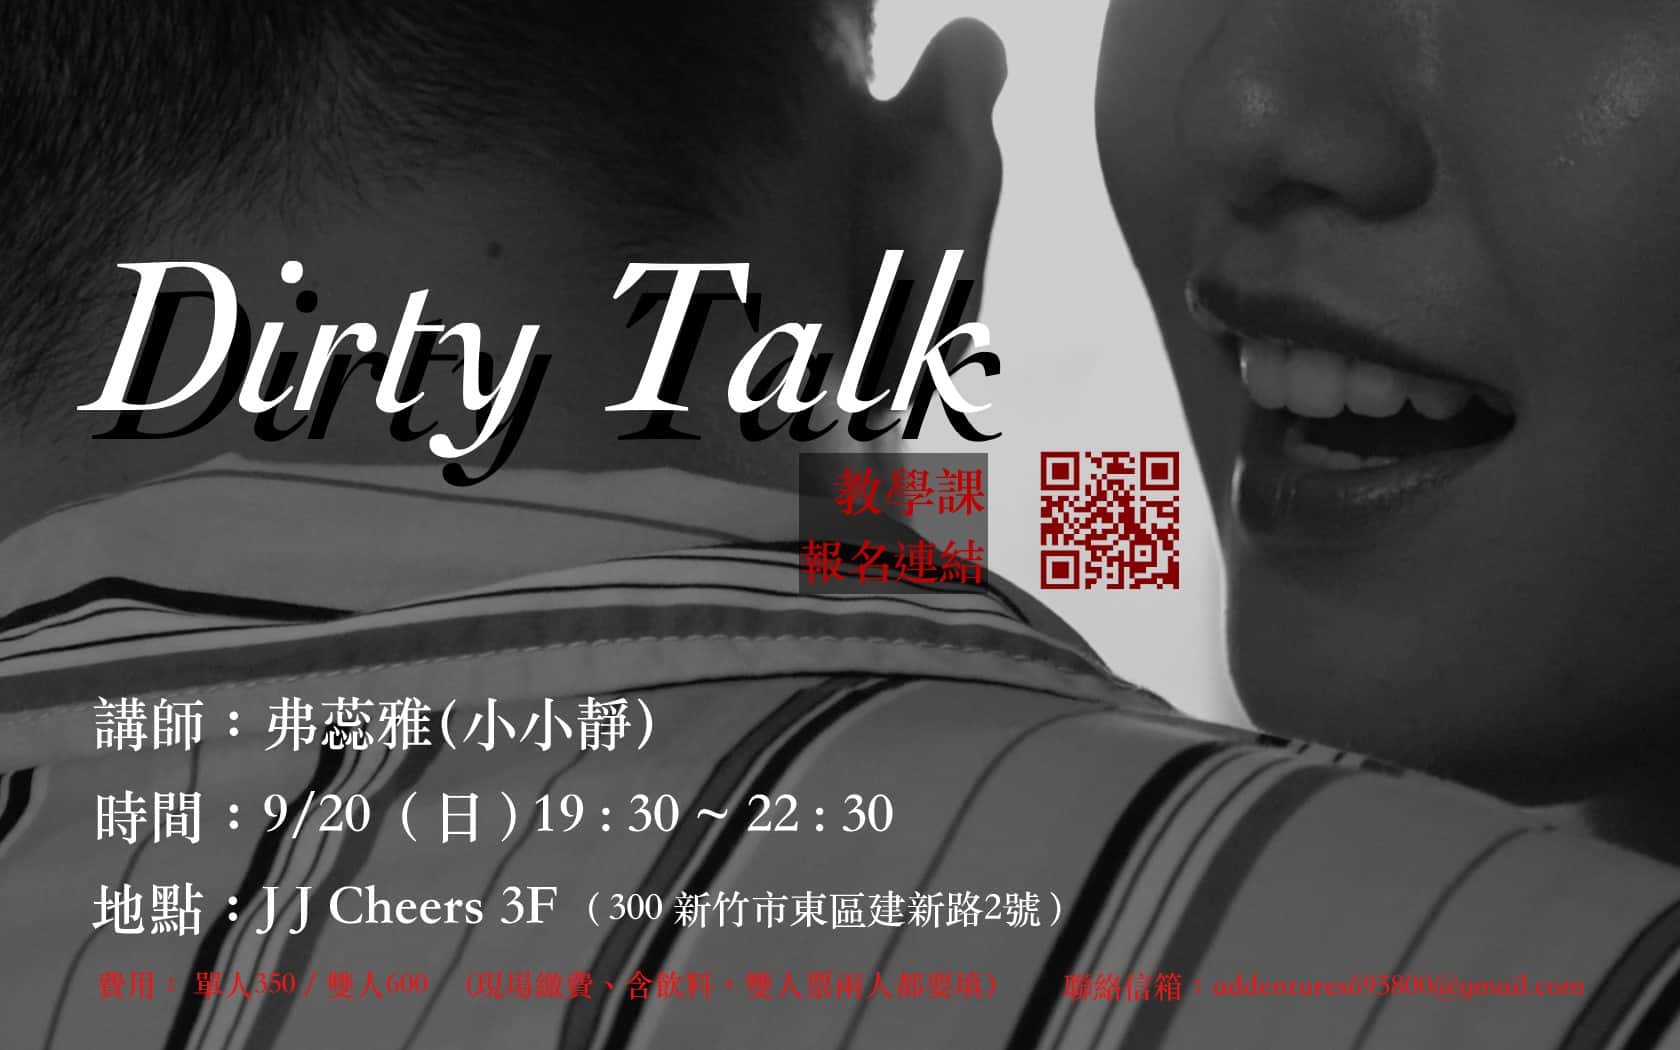 albina baazov recommends Dirty Talk Chinese